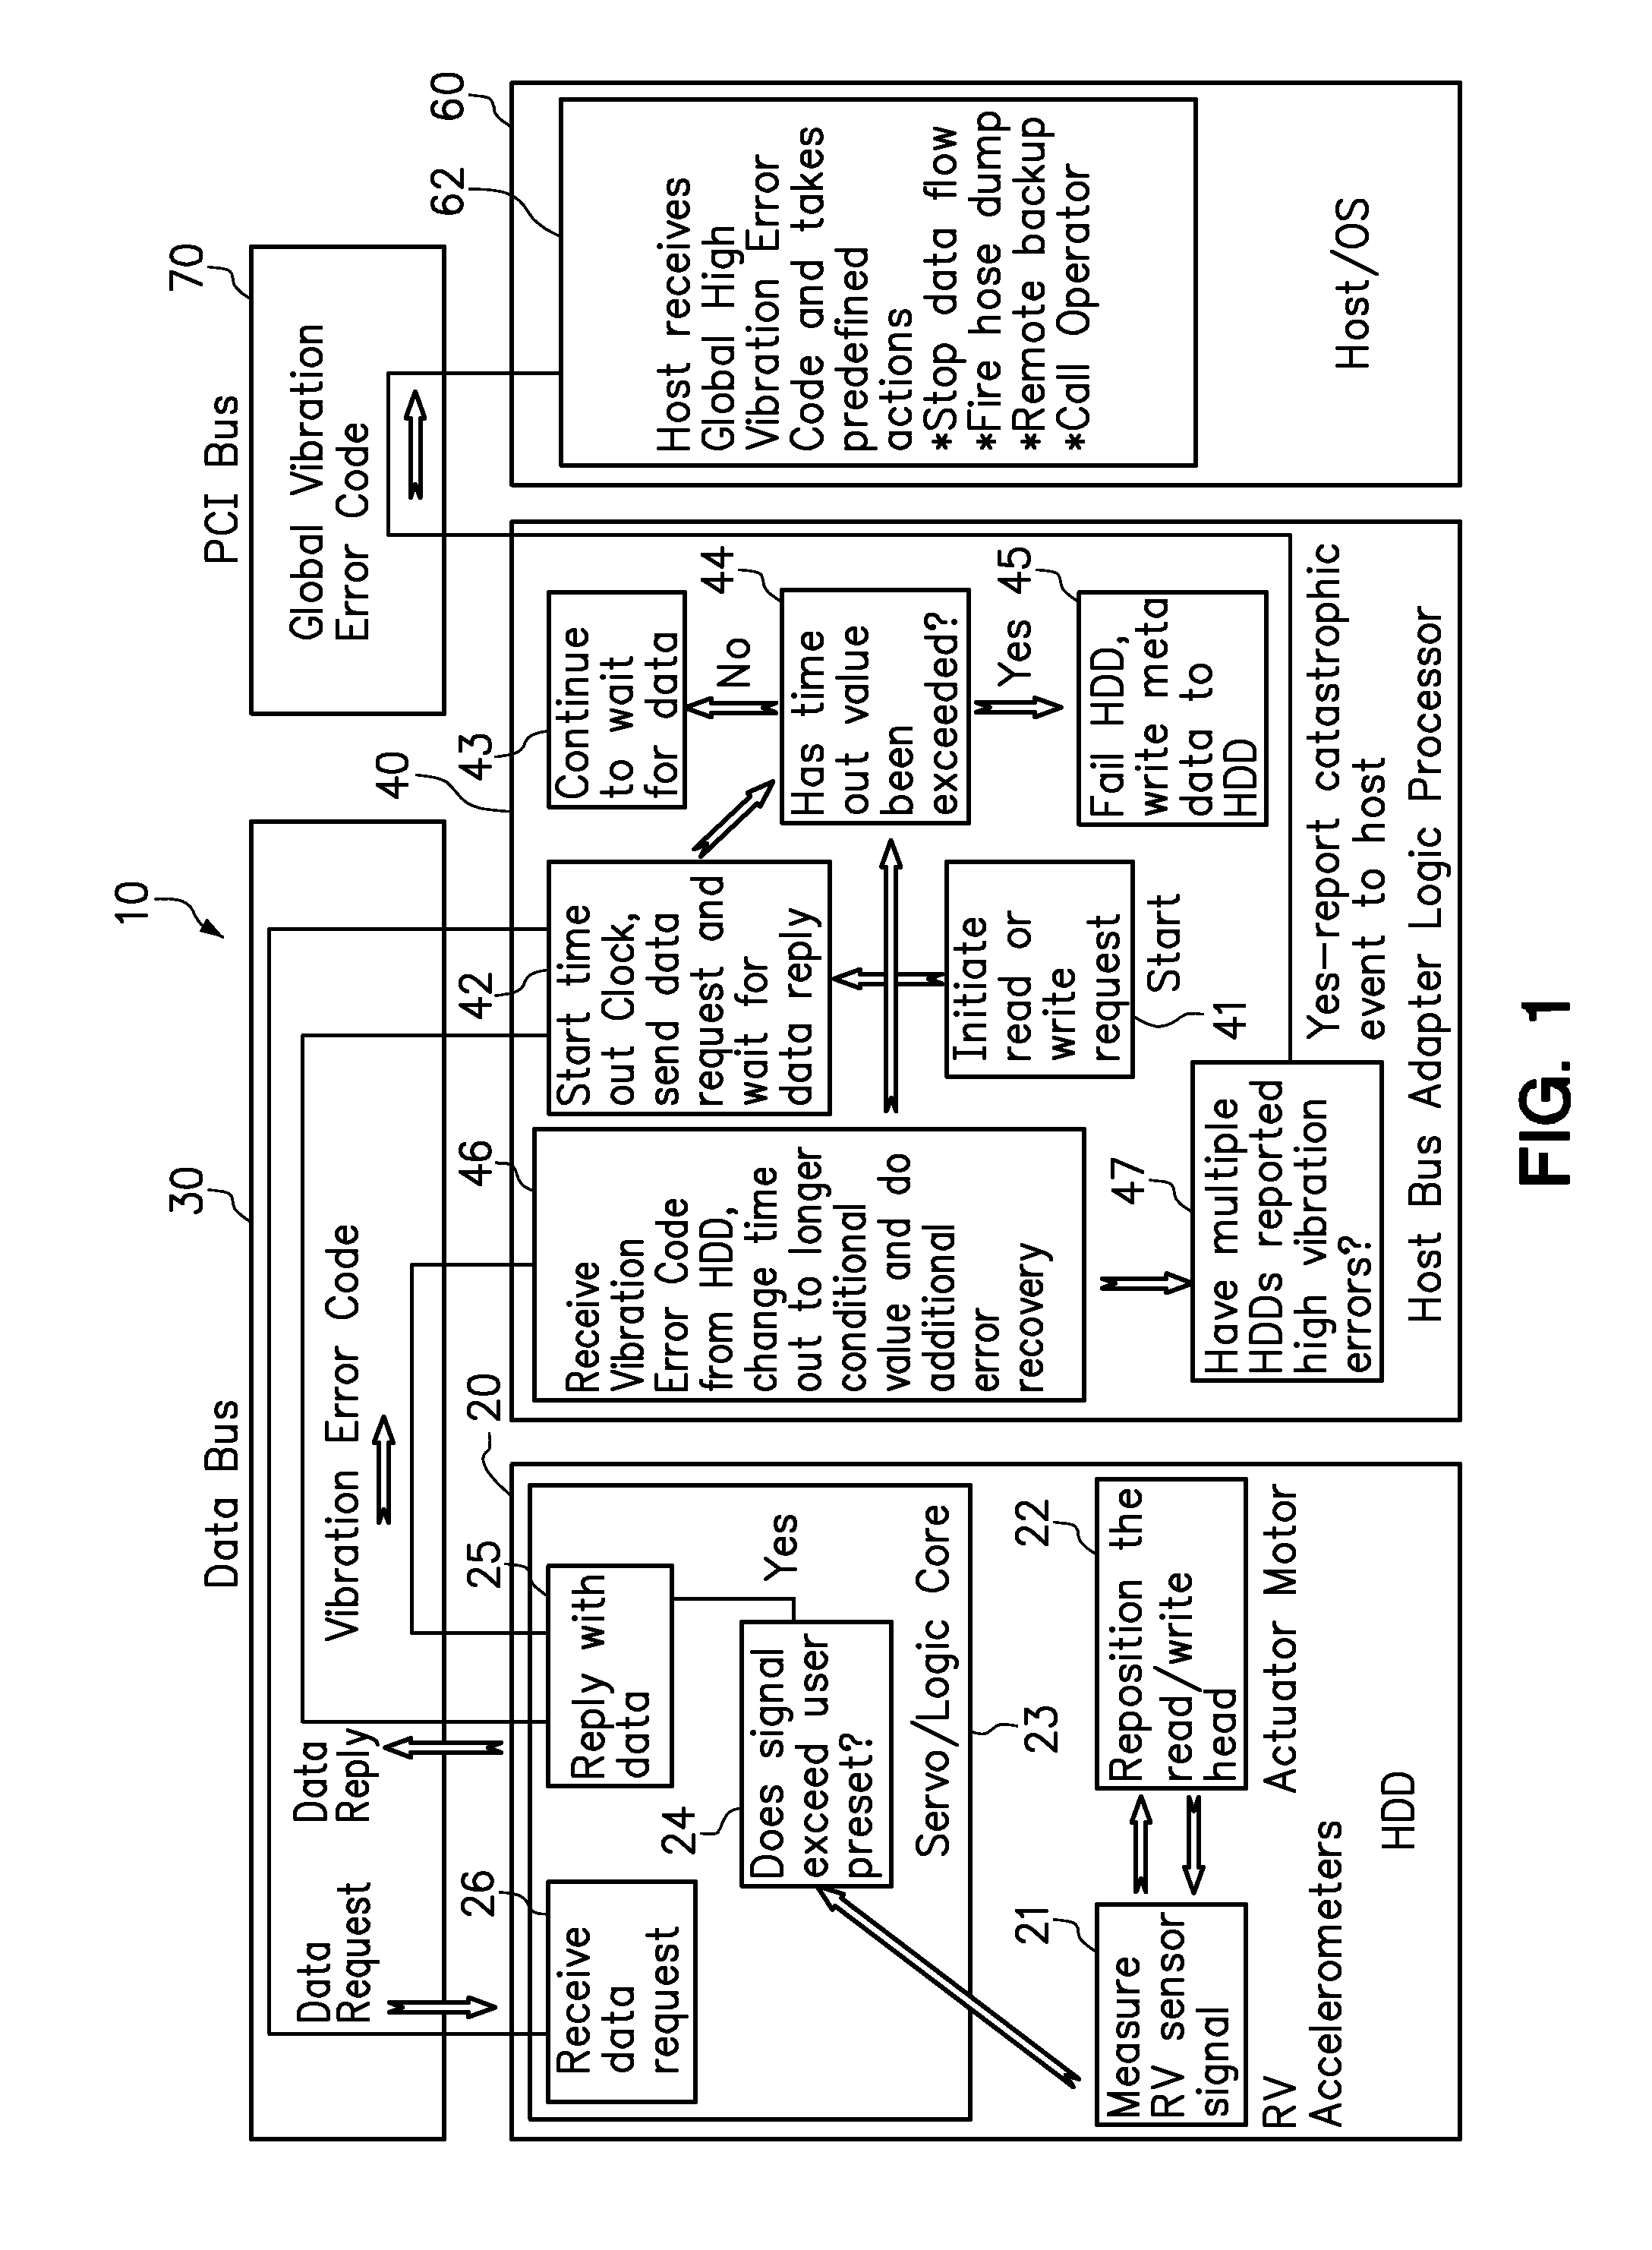 Hard Disk Drive Availability Following Transient Vibration